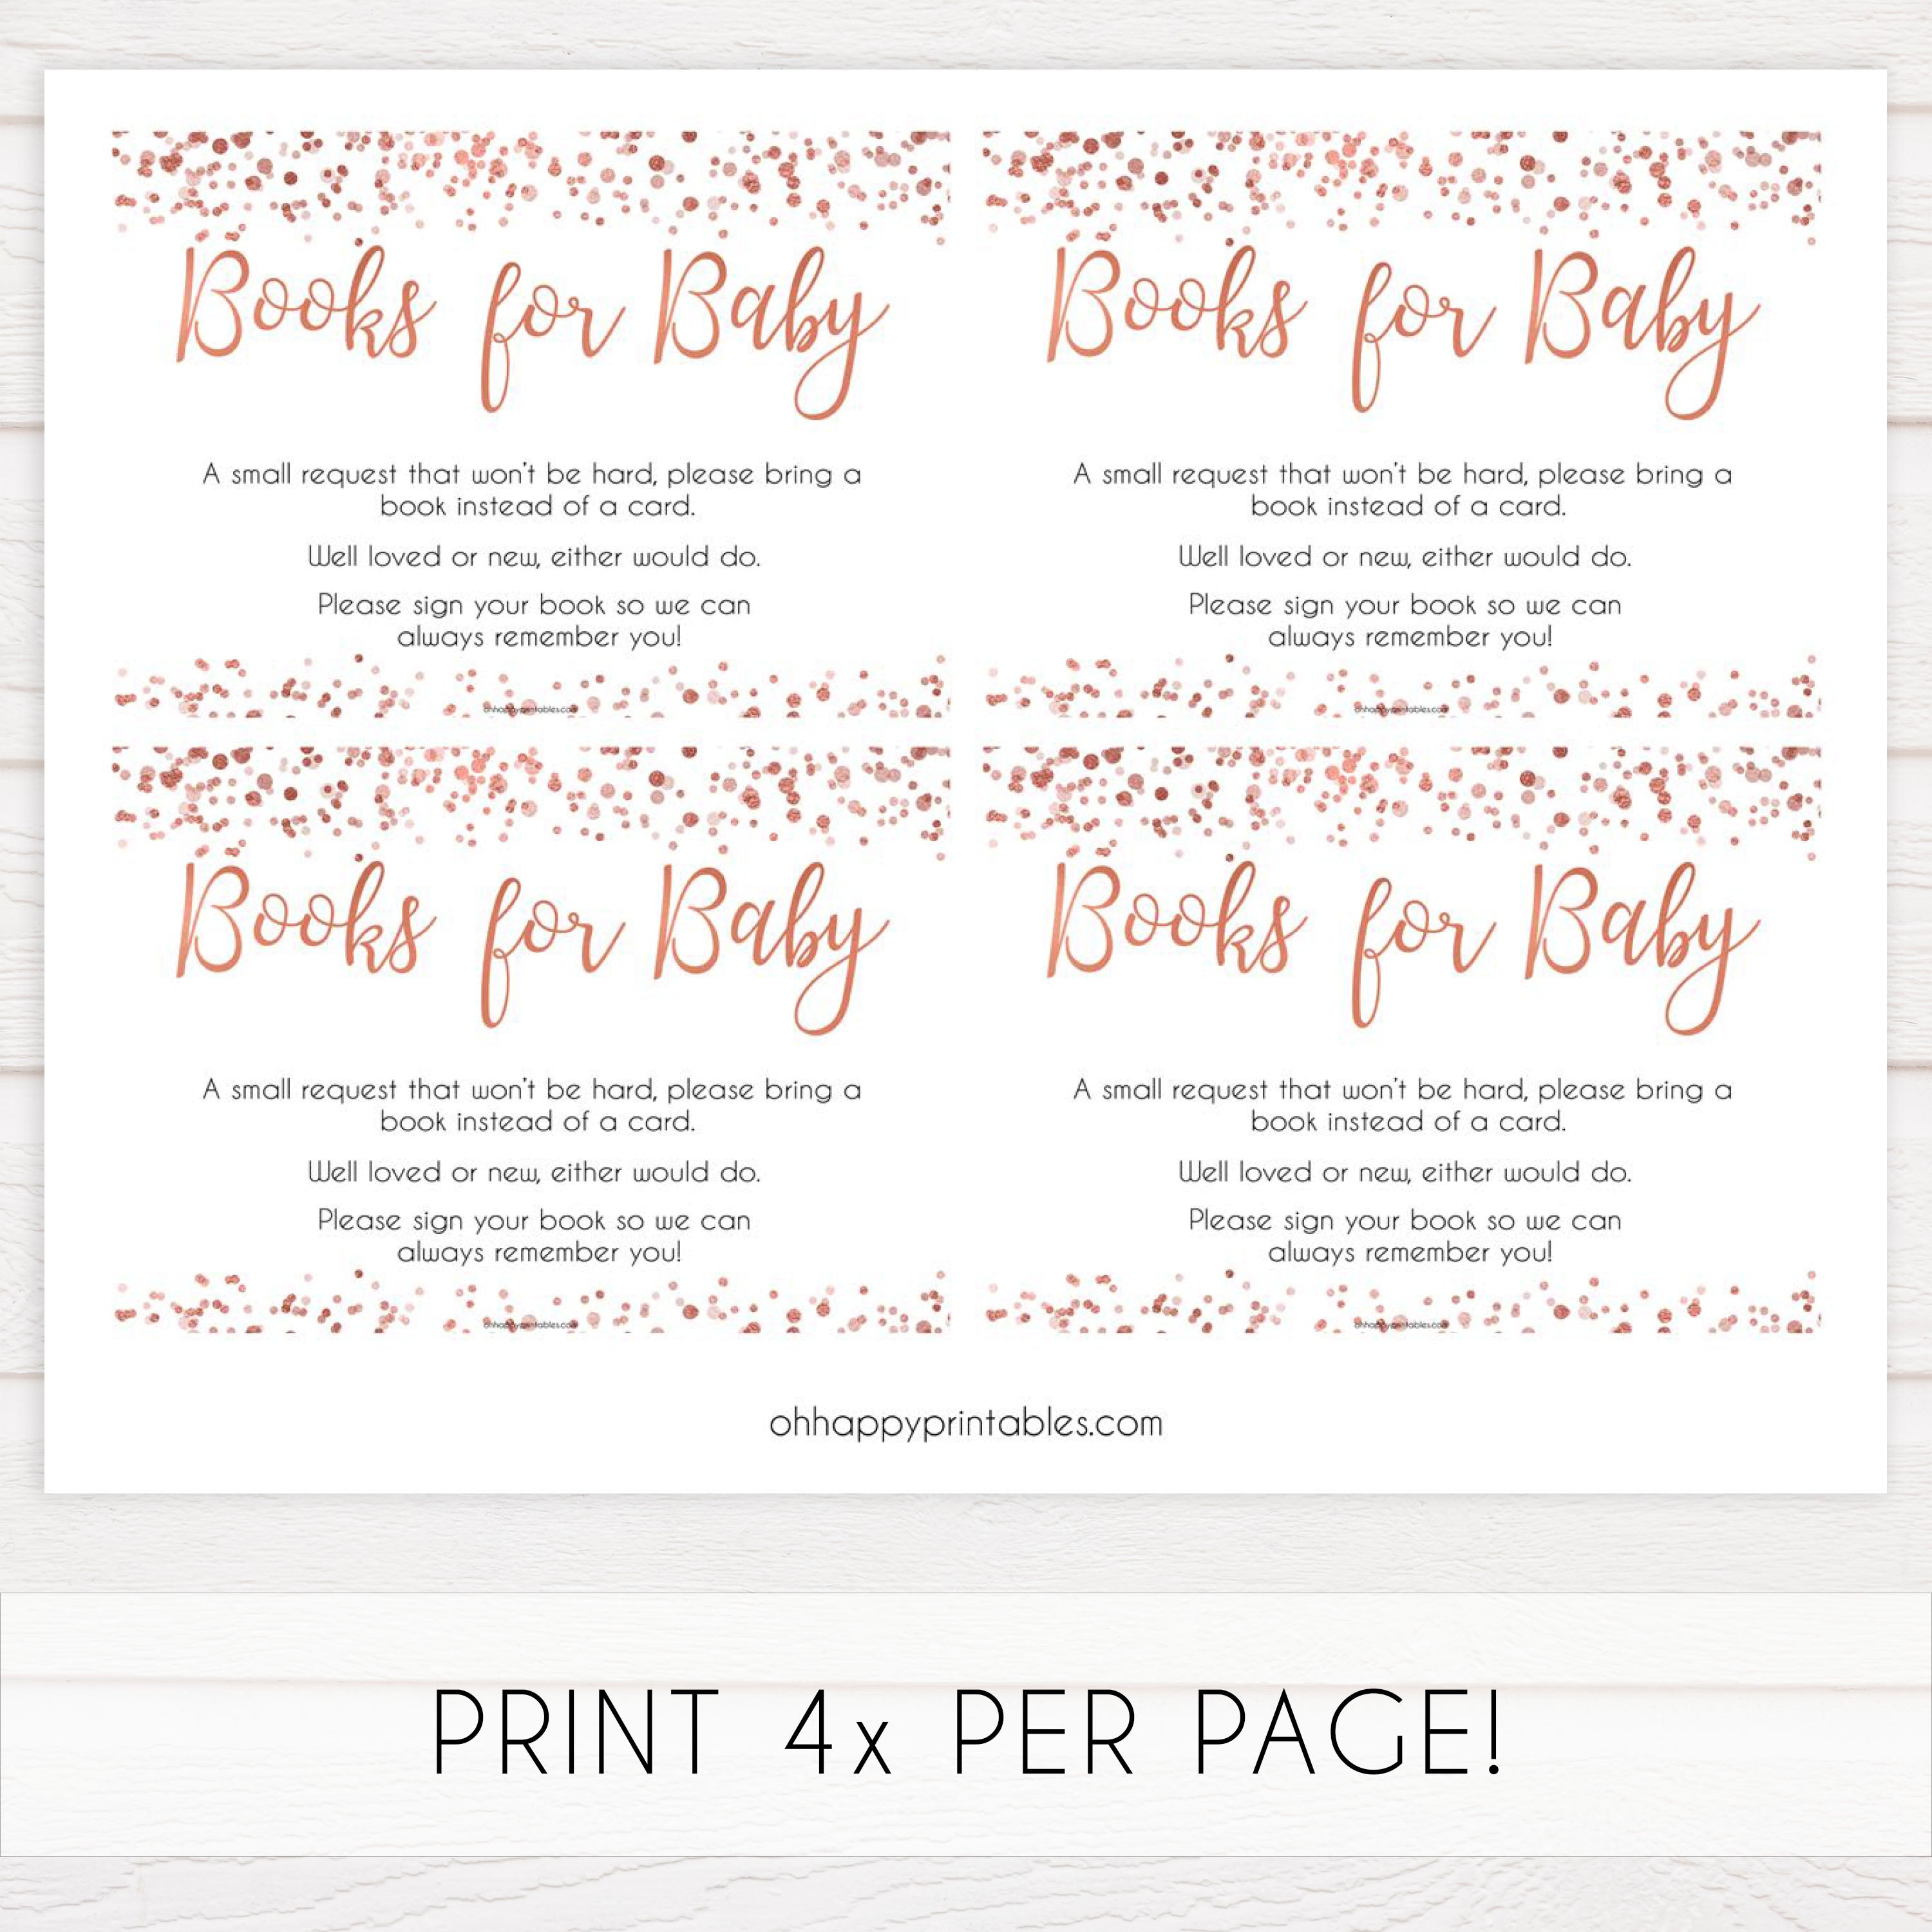 bring a book game, books for baby insert, Printable baby shower games, rose gold fun baby games, baby shower games, fun baby shower ideas, top baby shower ideas, blush baby shower, rose gold baby shower ideas